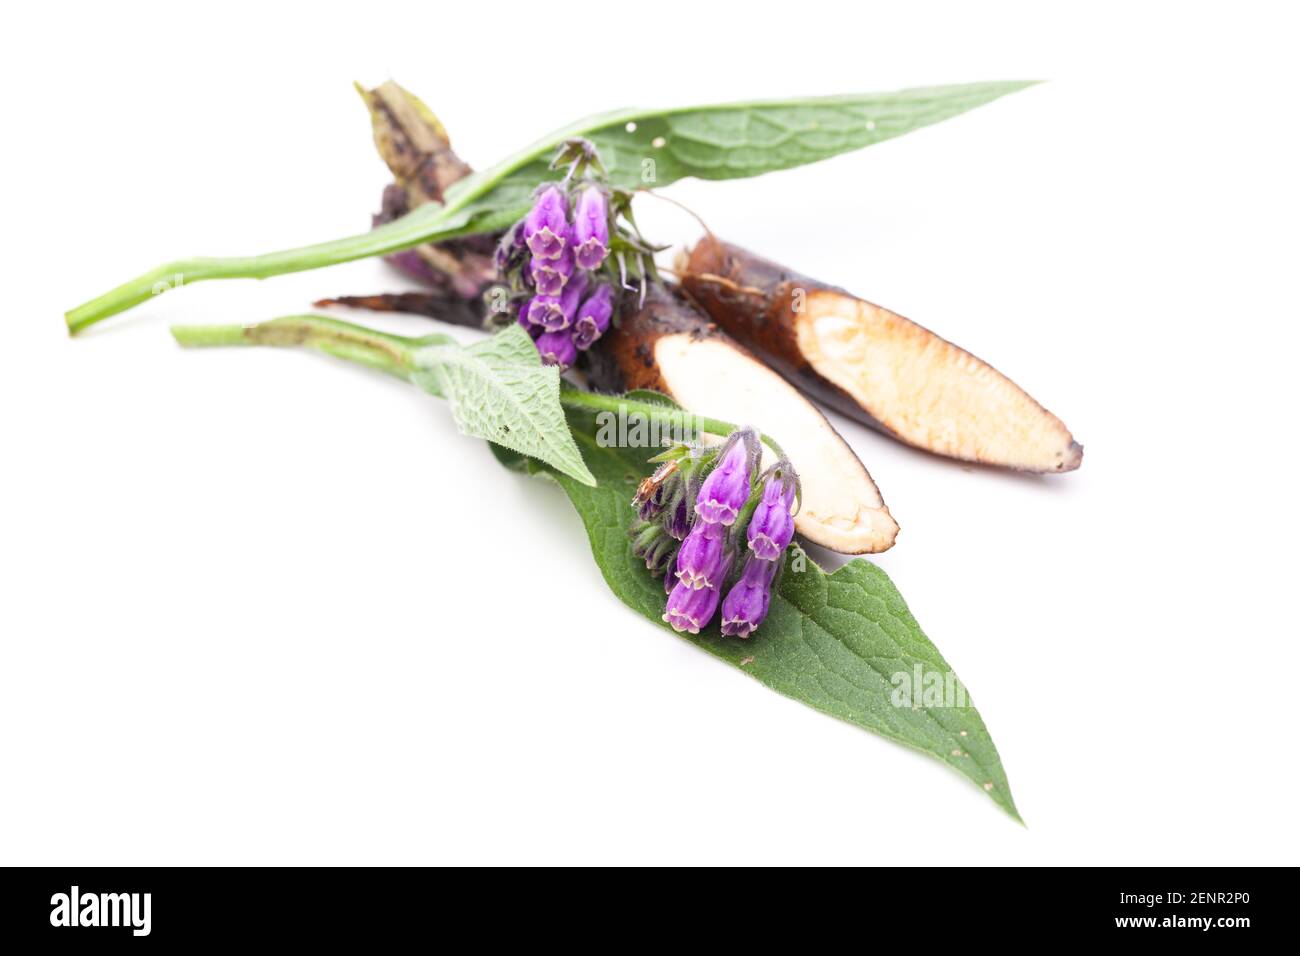 Comfrey (Symphytum officinale L.) flower and root Stock Photo